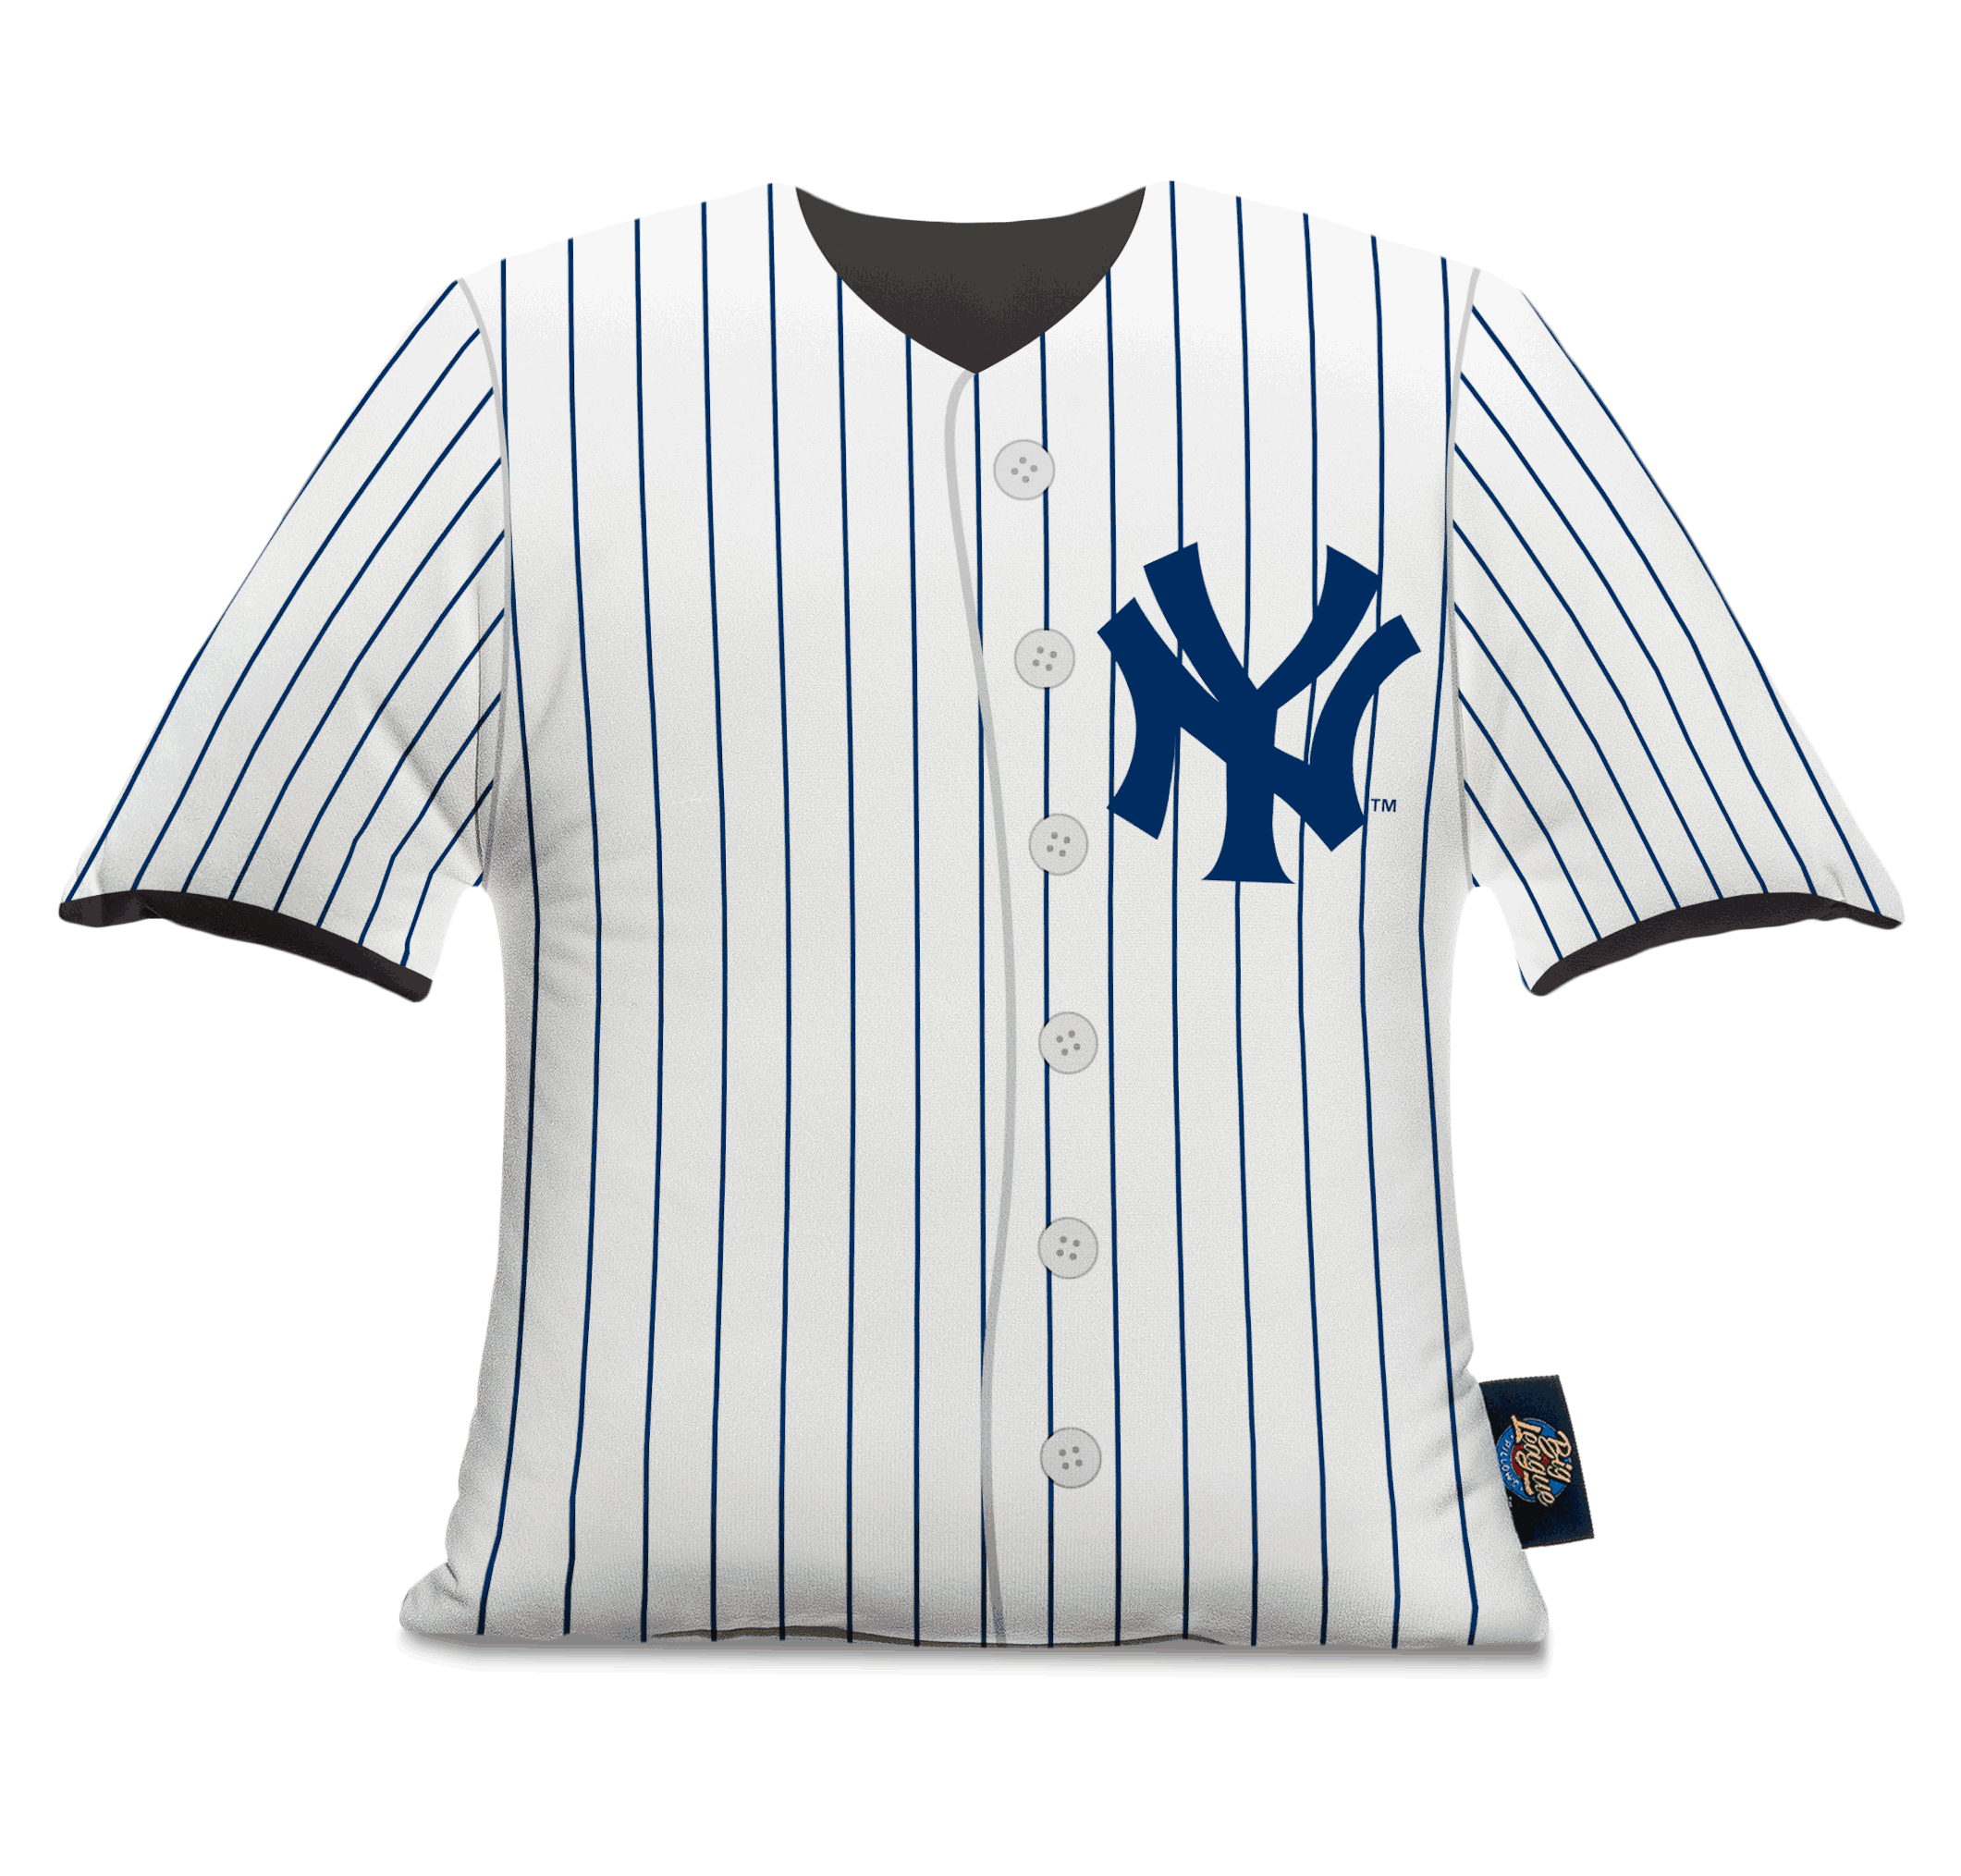 How To Customize a MLB Baseball Jersey 